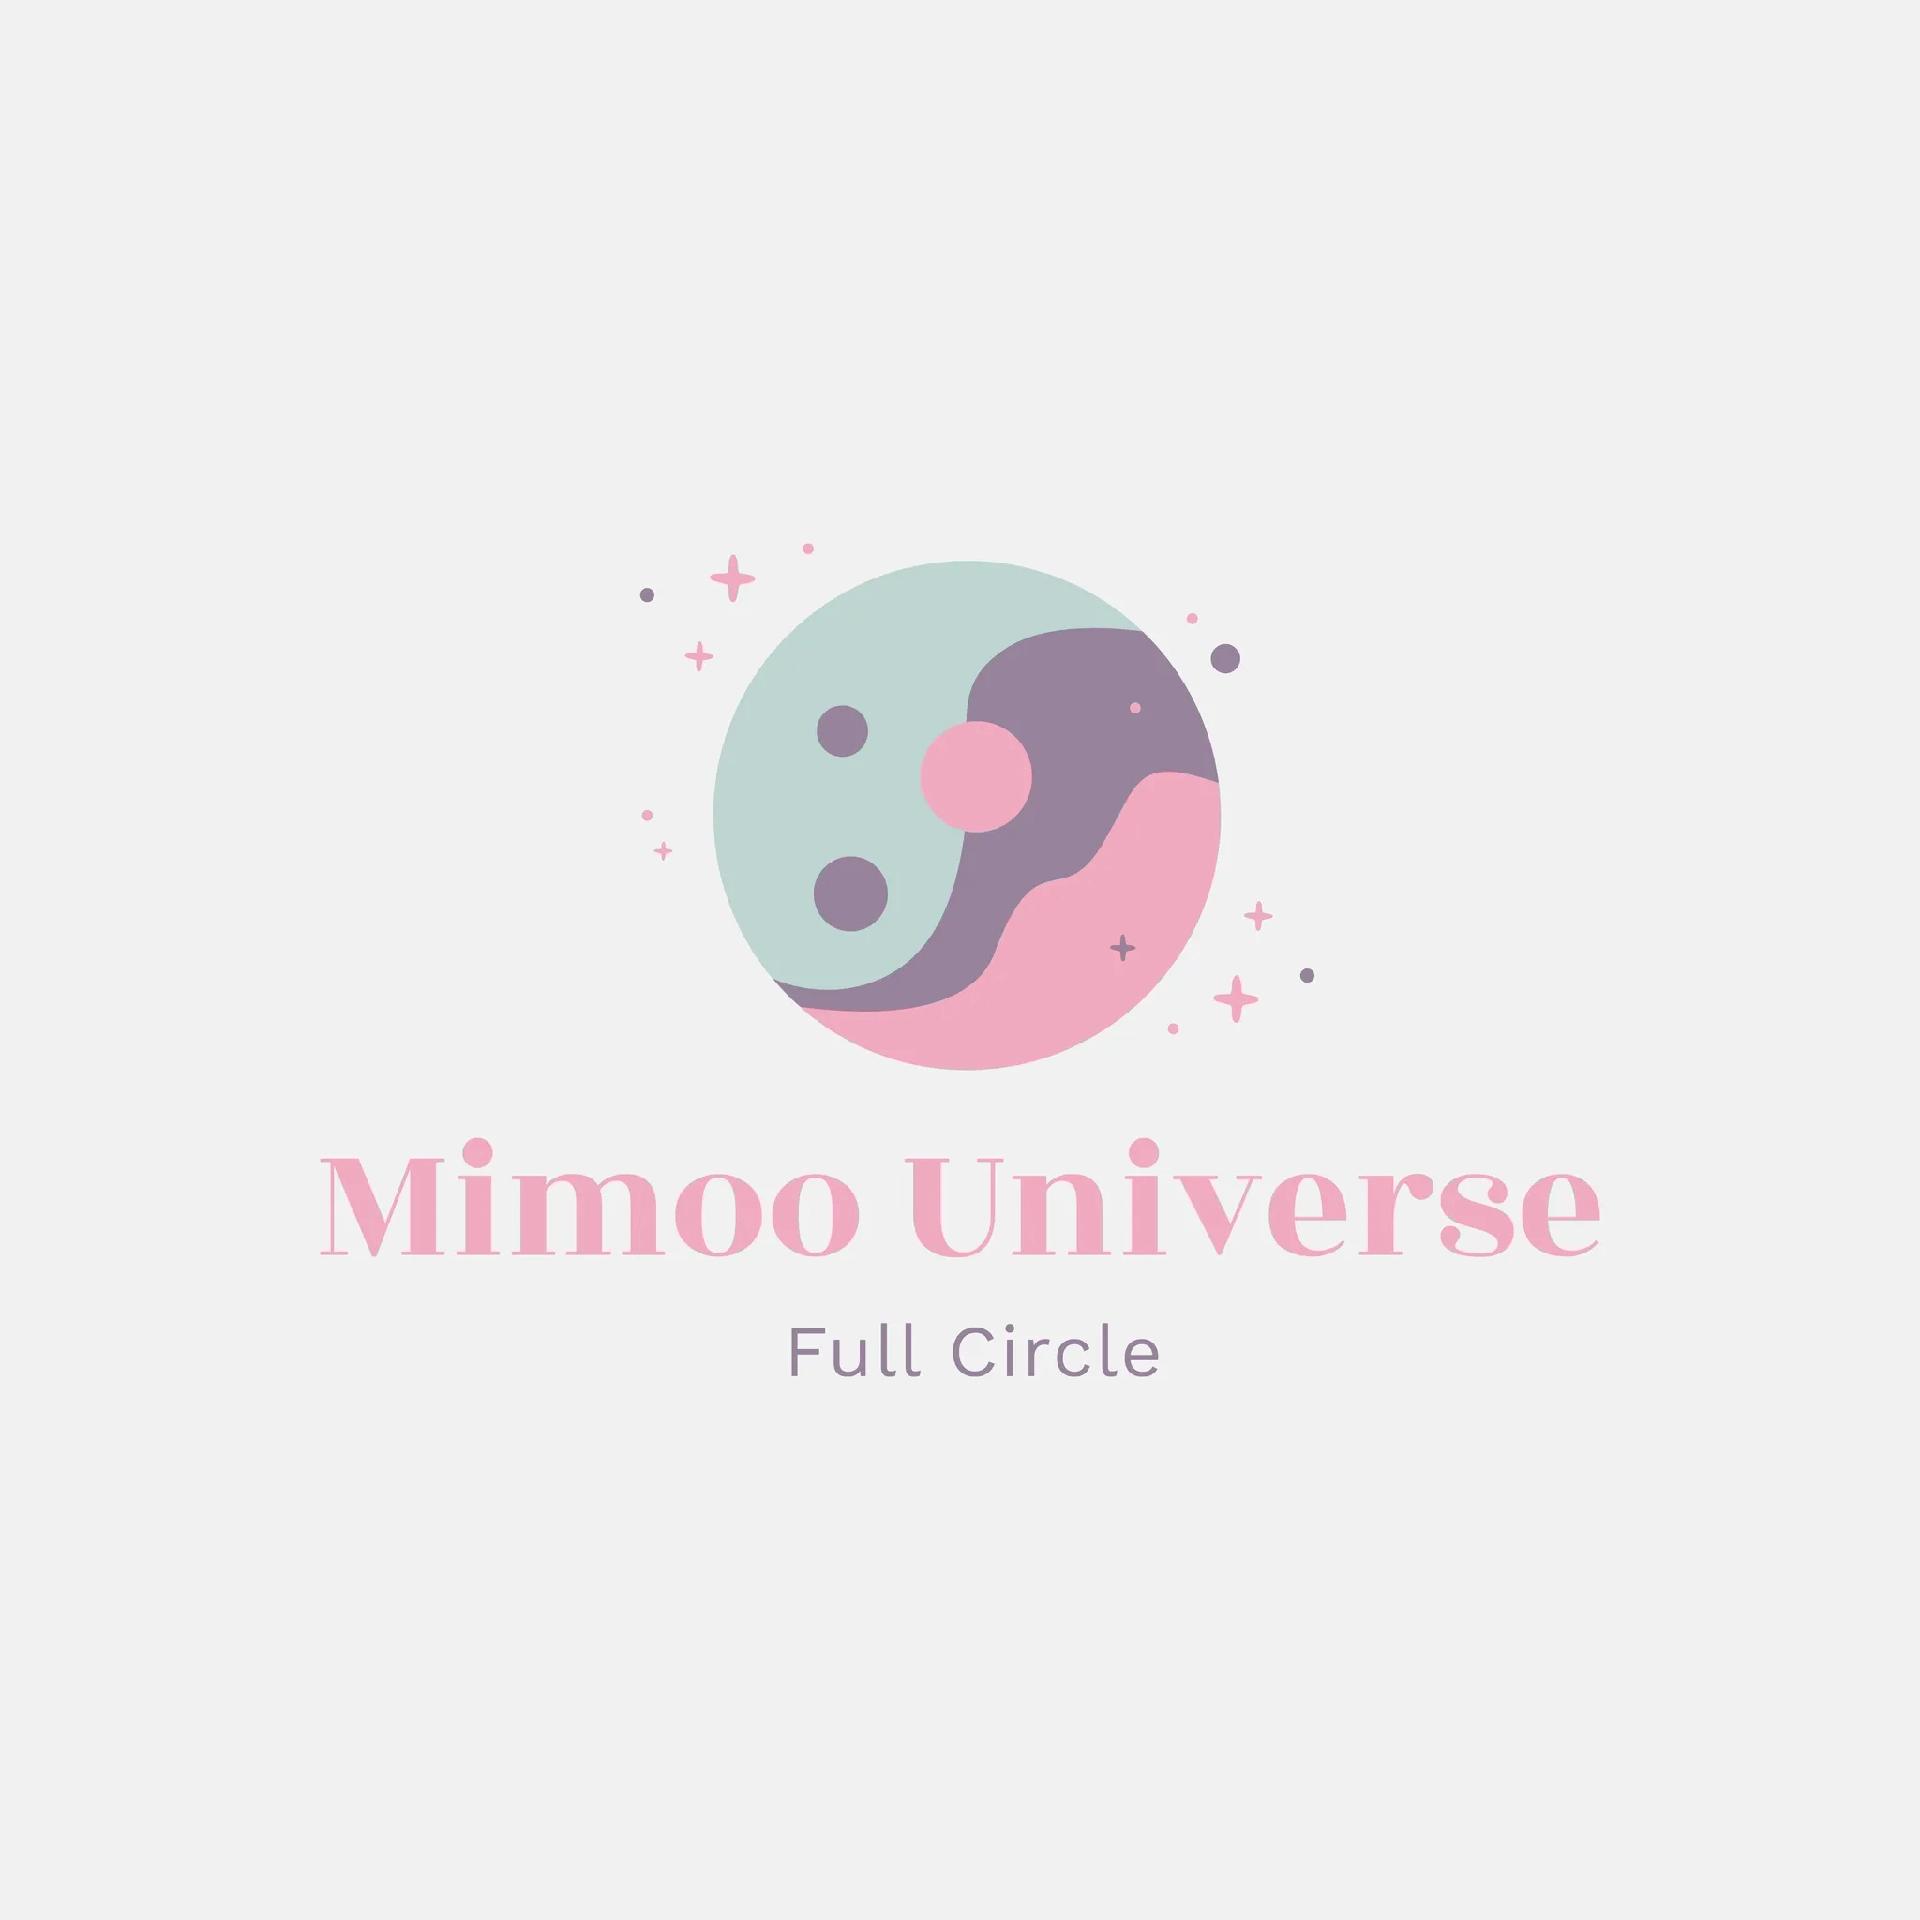 Mimoo's images